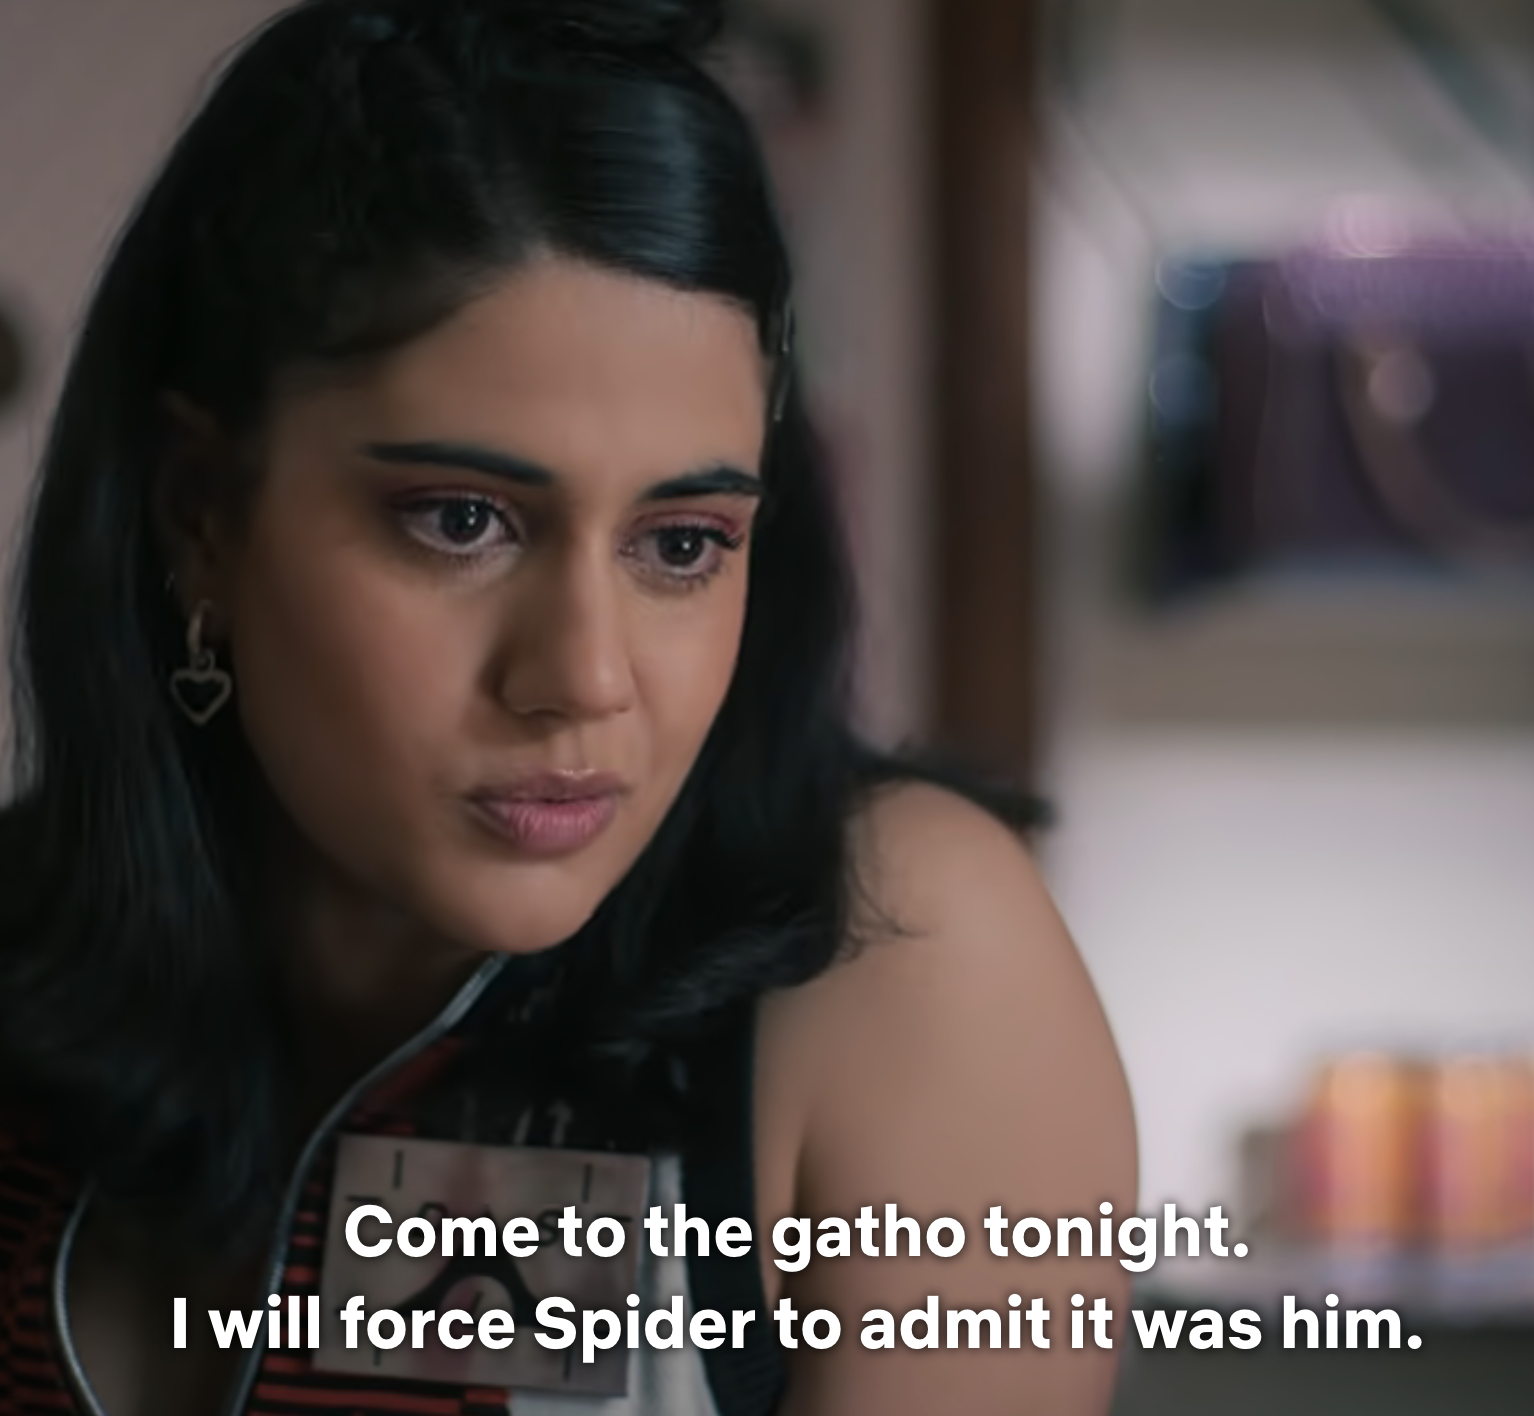 TV show character with concerned expression, text overlay: &quot;Come to the gatho tonight. I will force Spider to admit it was him.&quot;